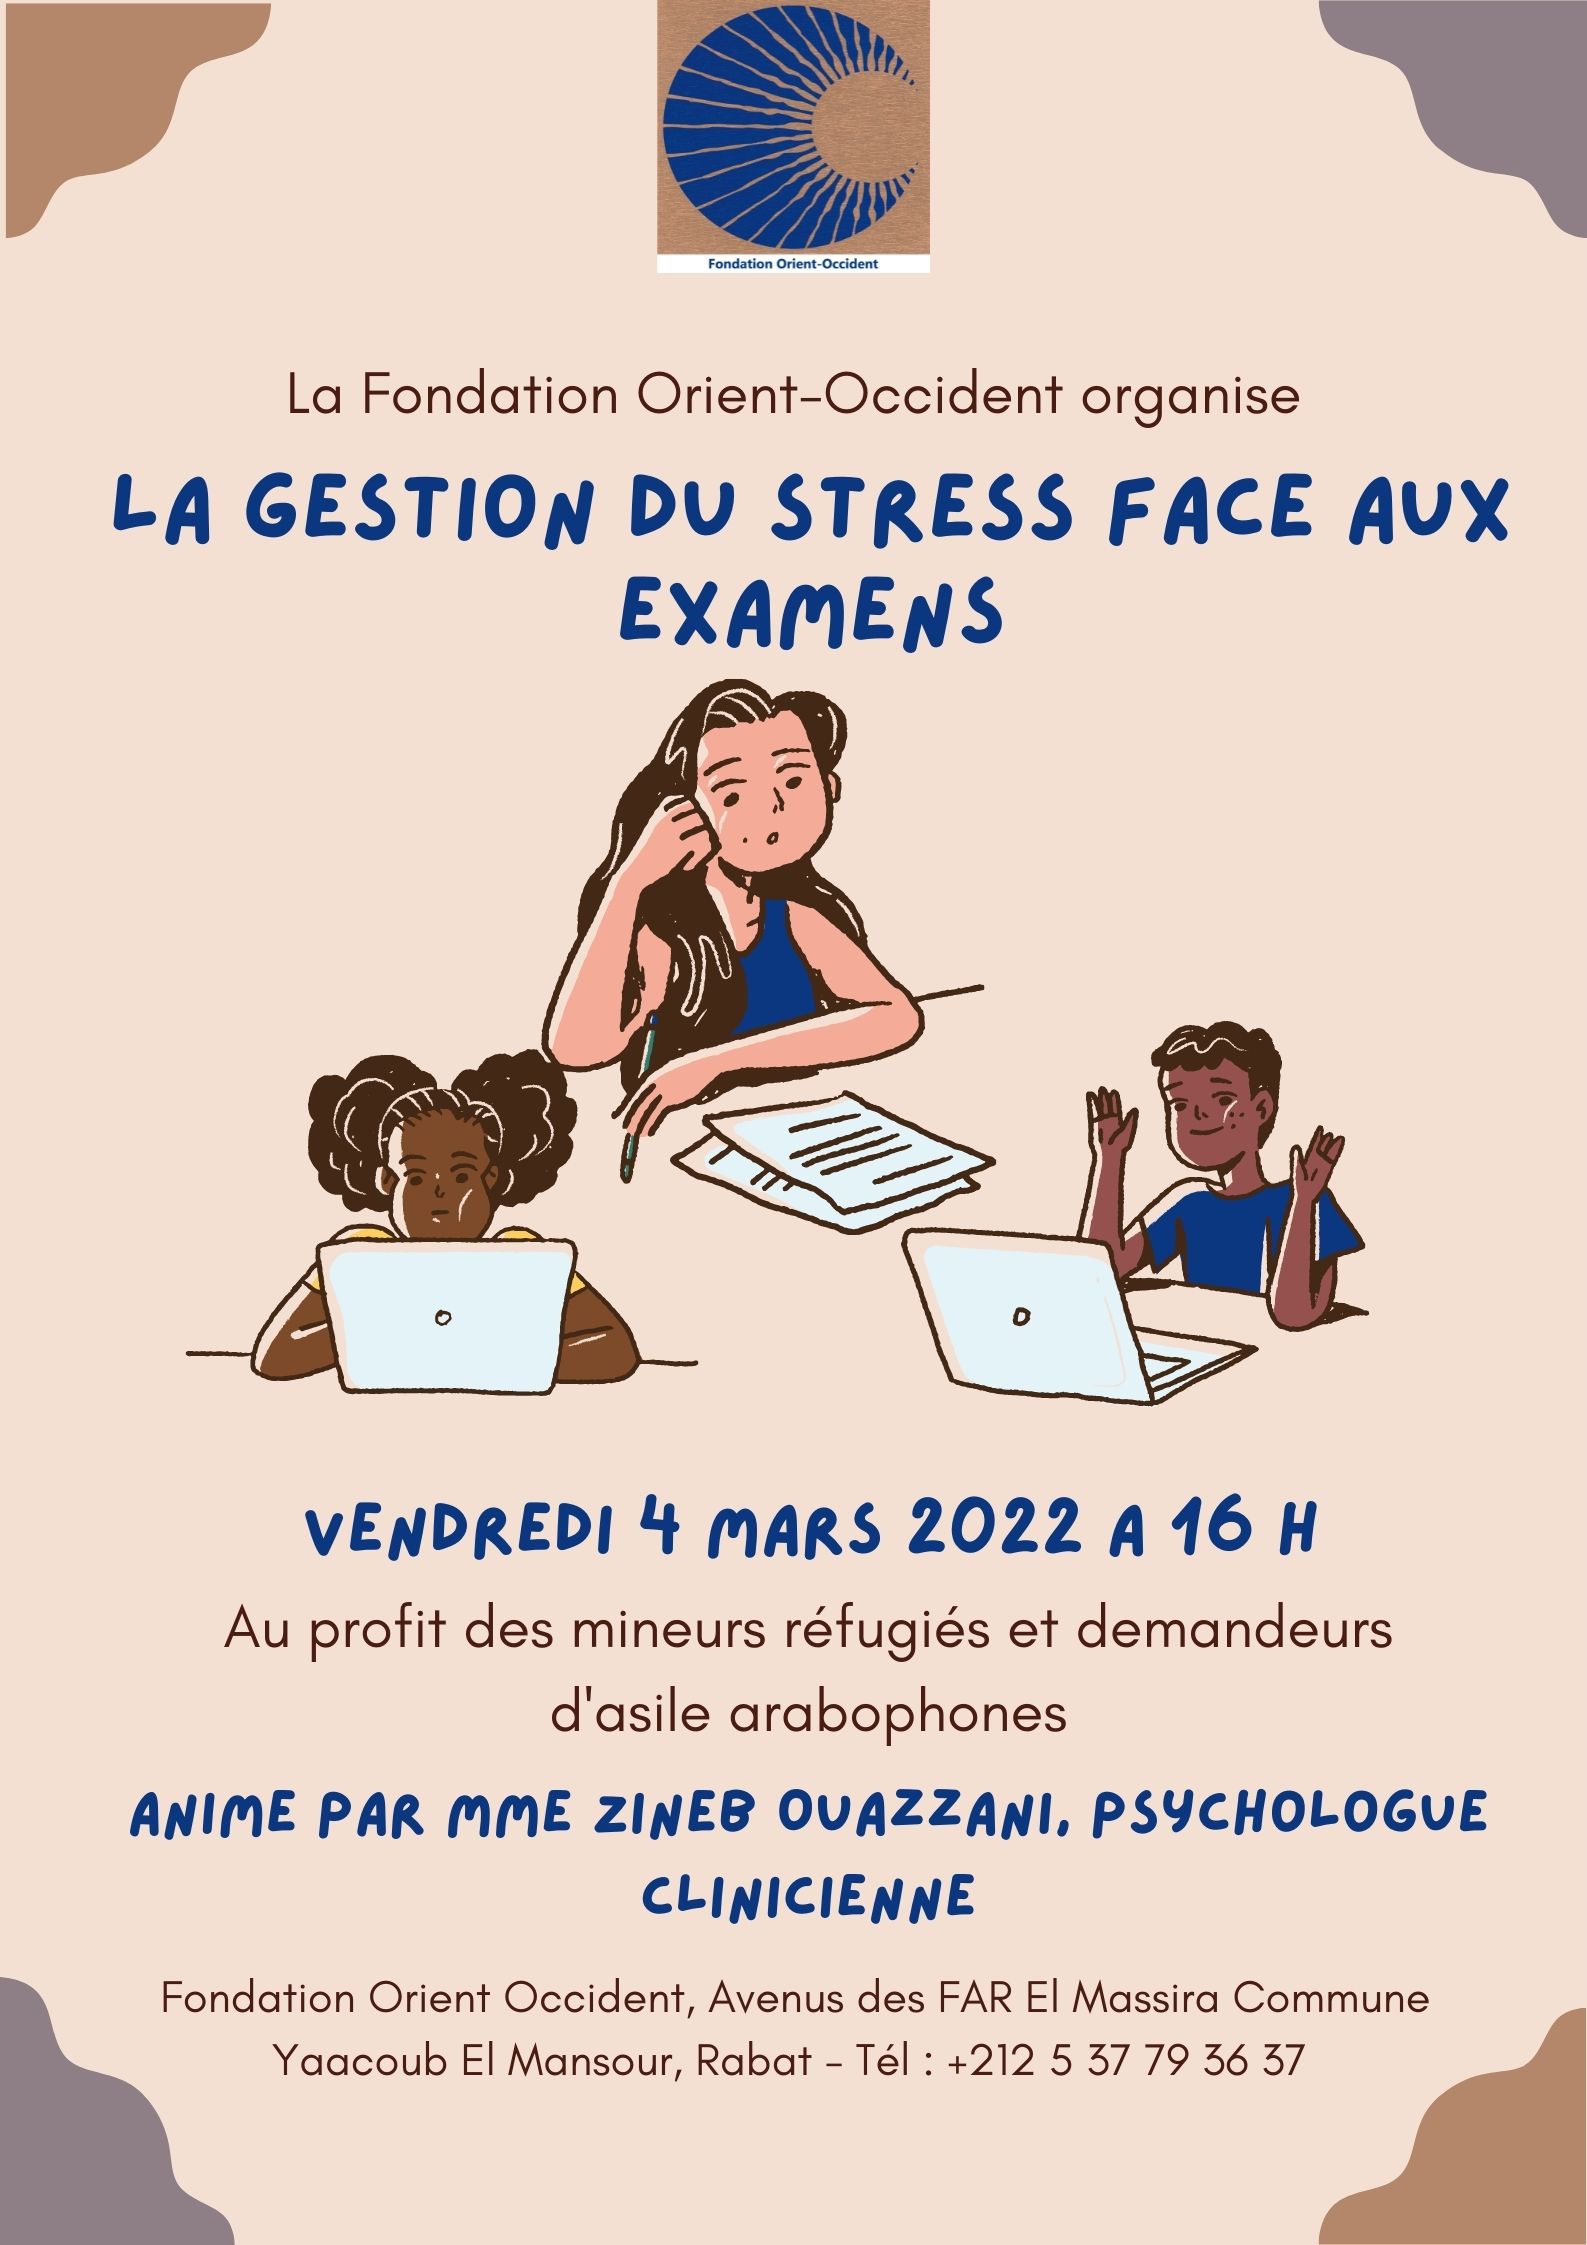 How to handle stress before exams – Workshop